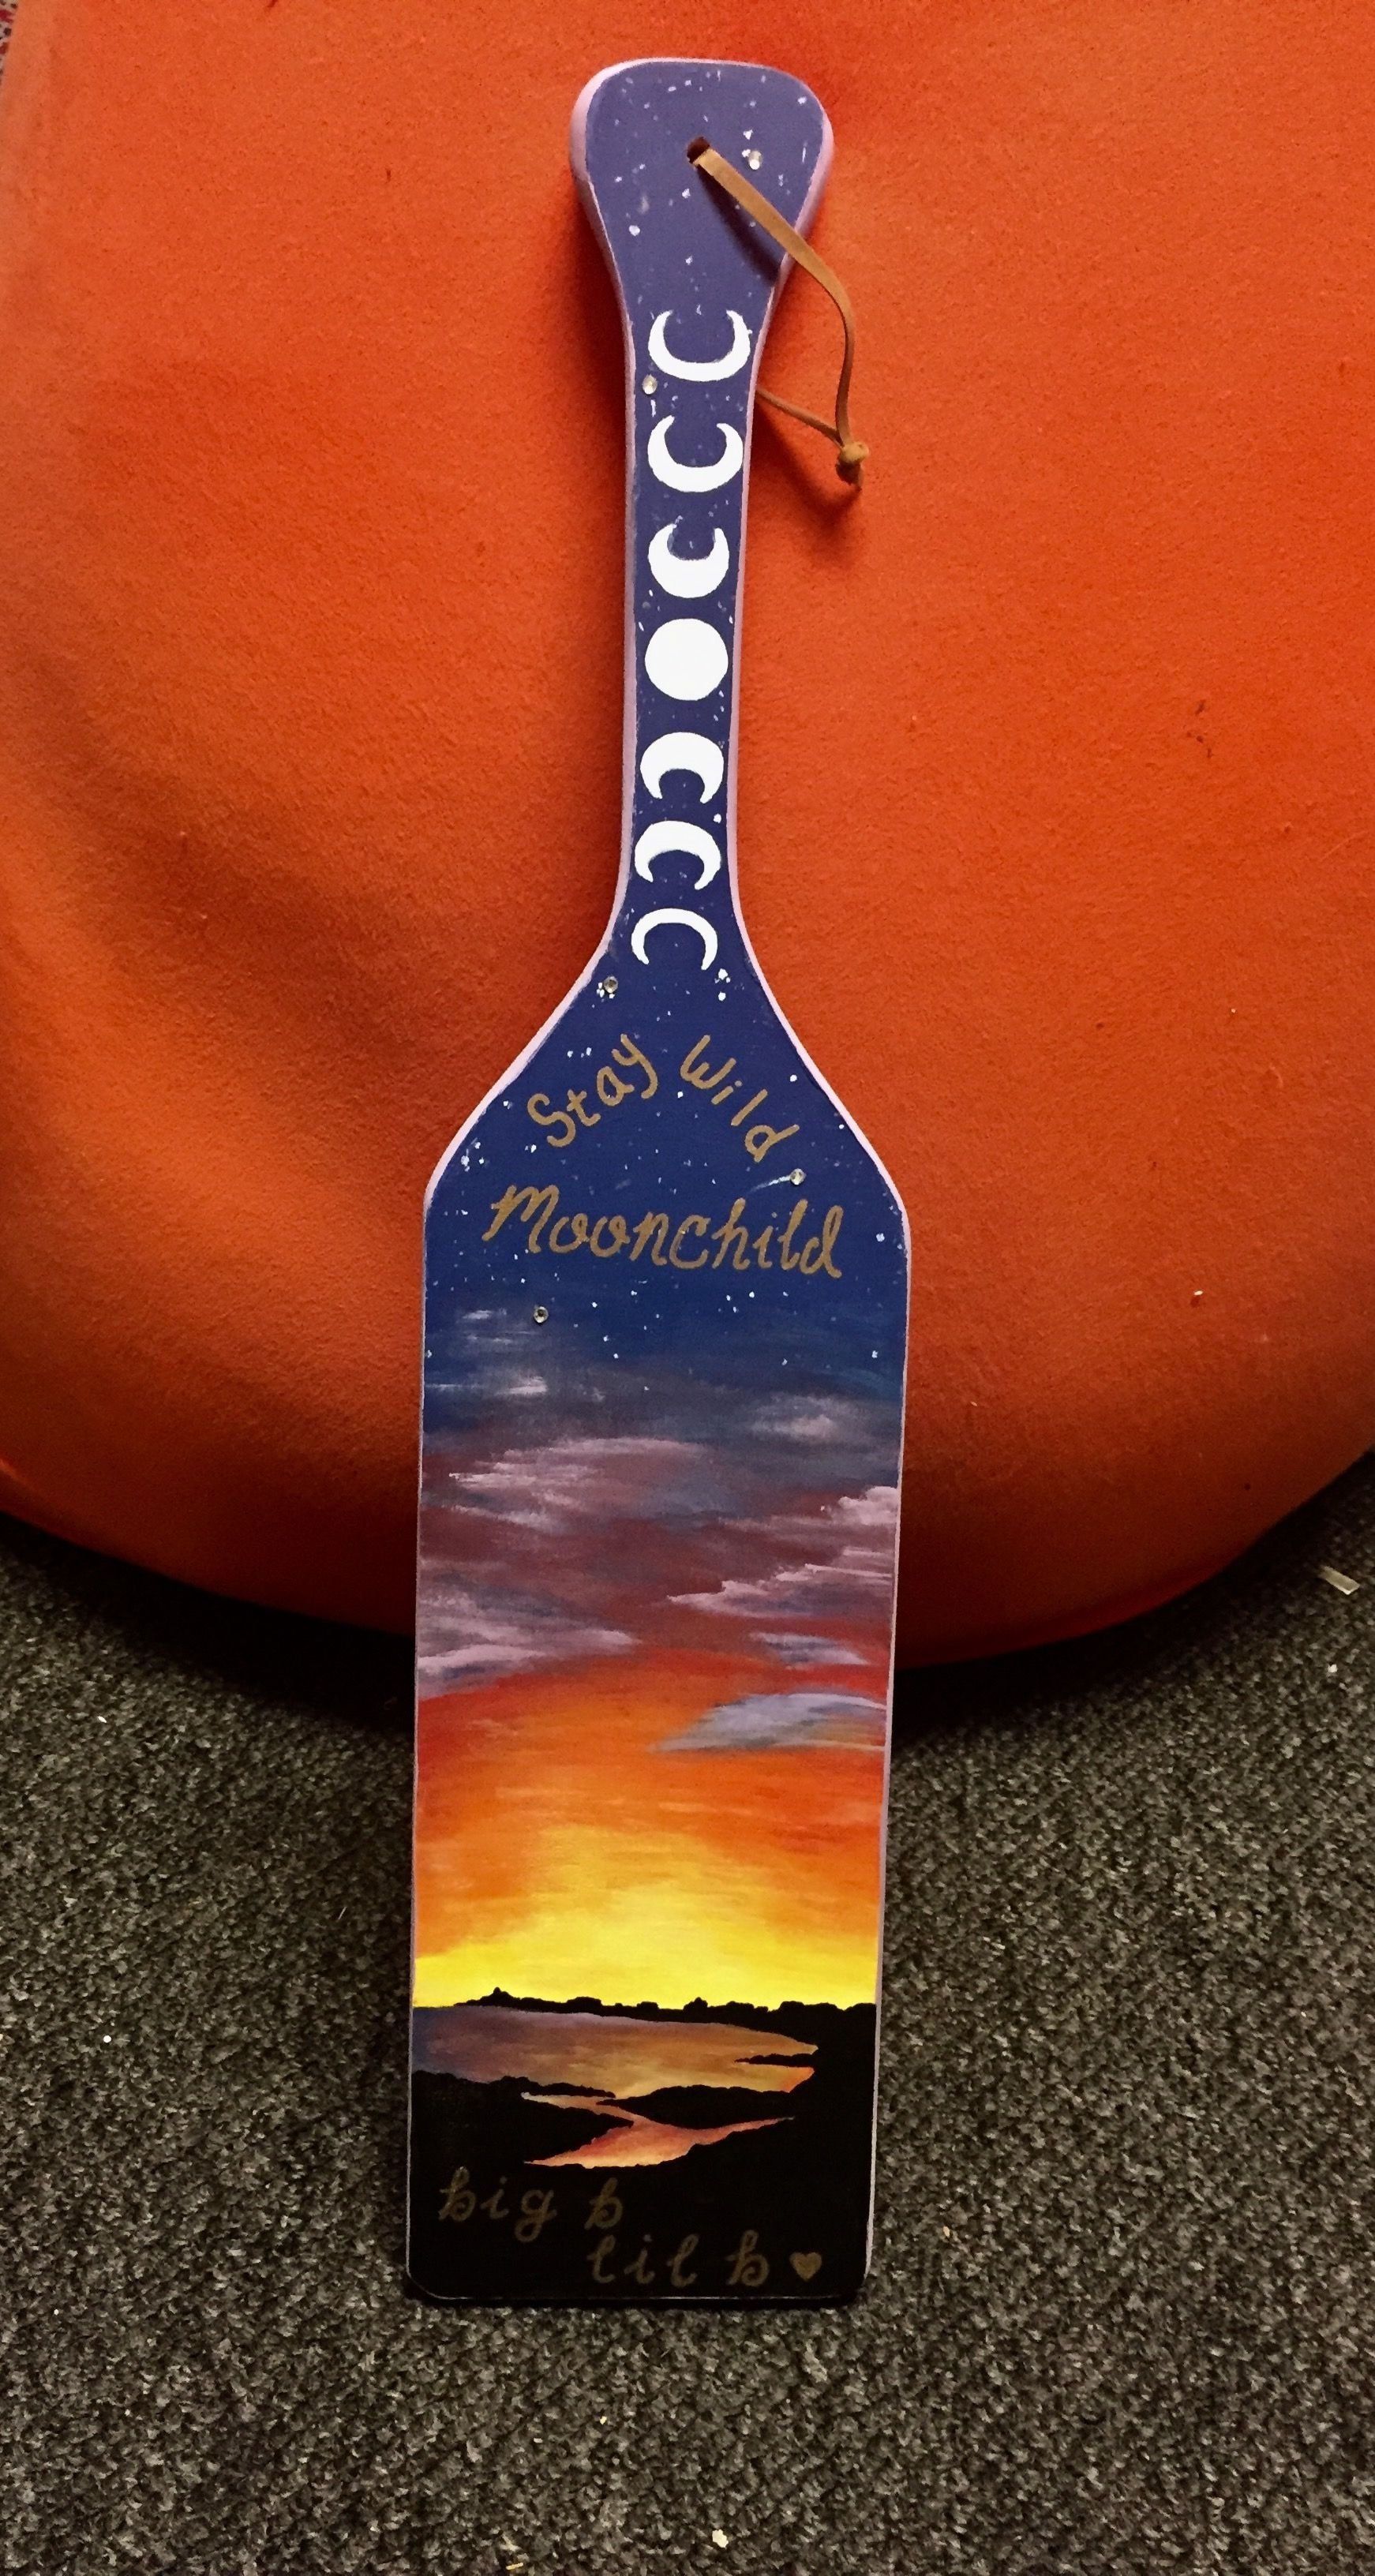 10 Most Recommended Paddle Ideas For Big Sister big little sorority paddle i made for my big sunset and the stars 2022